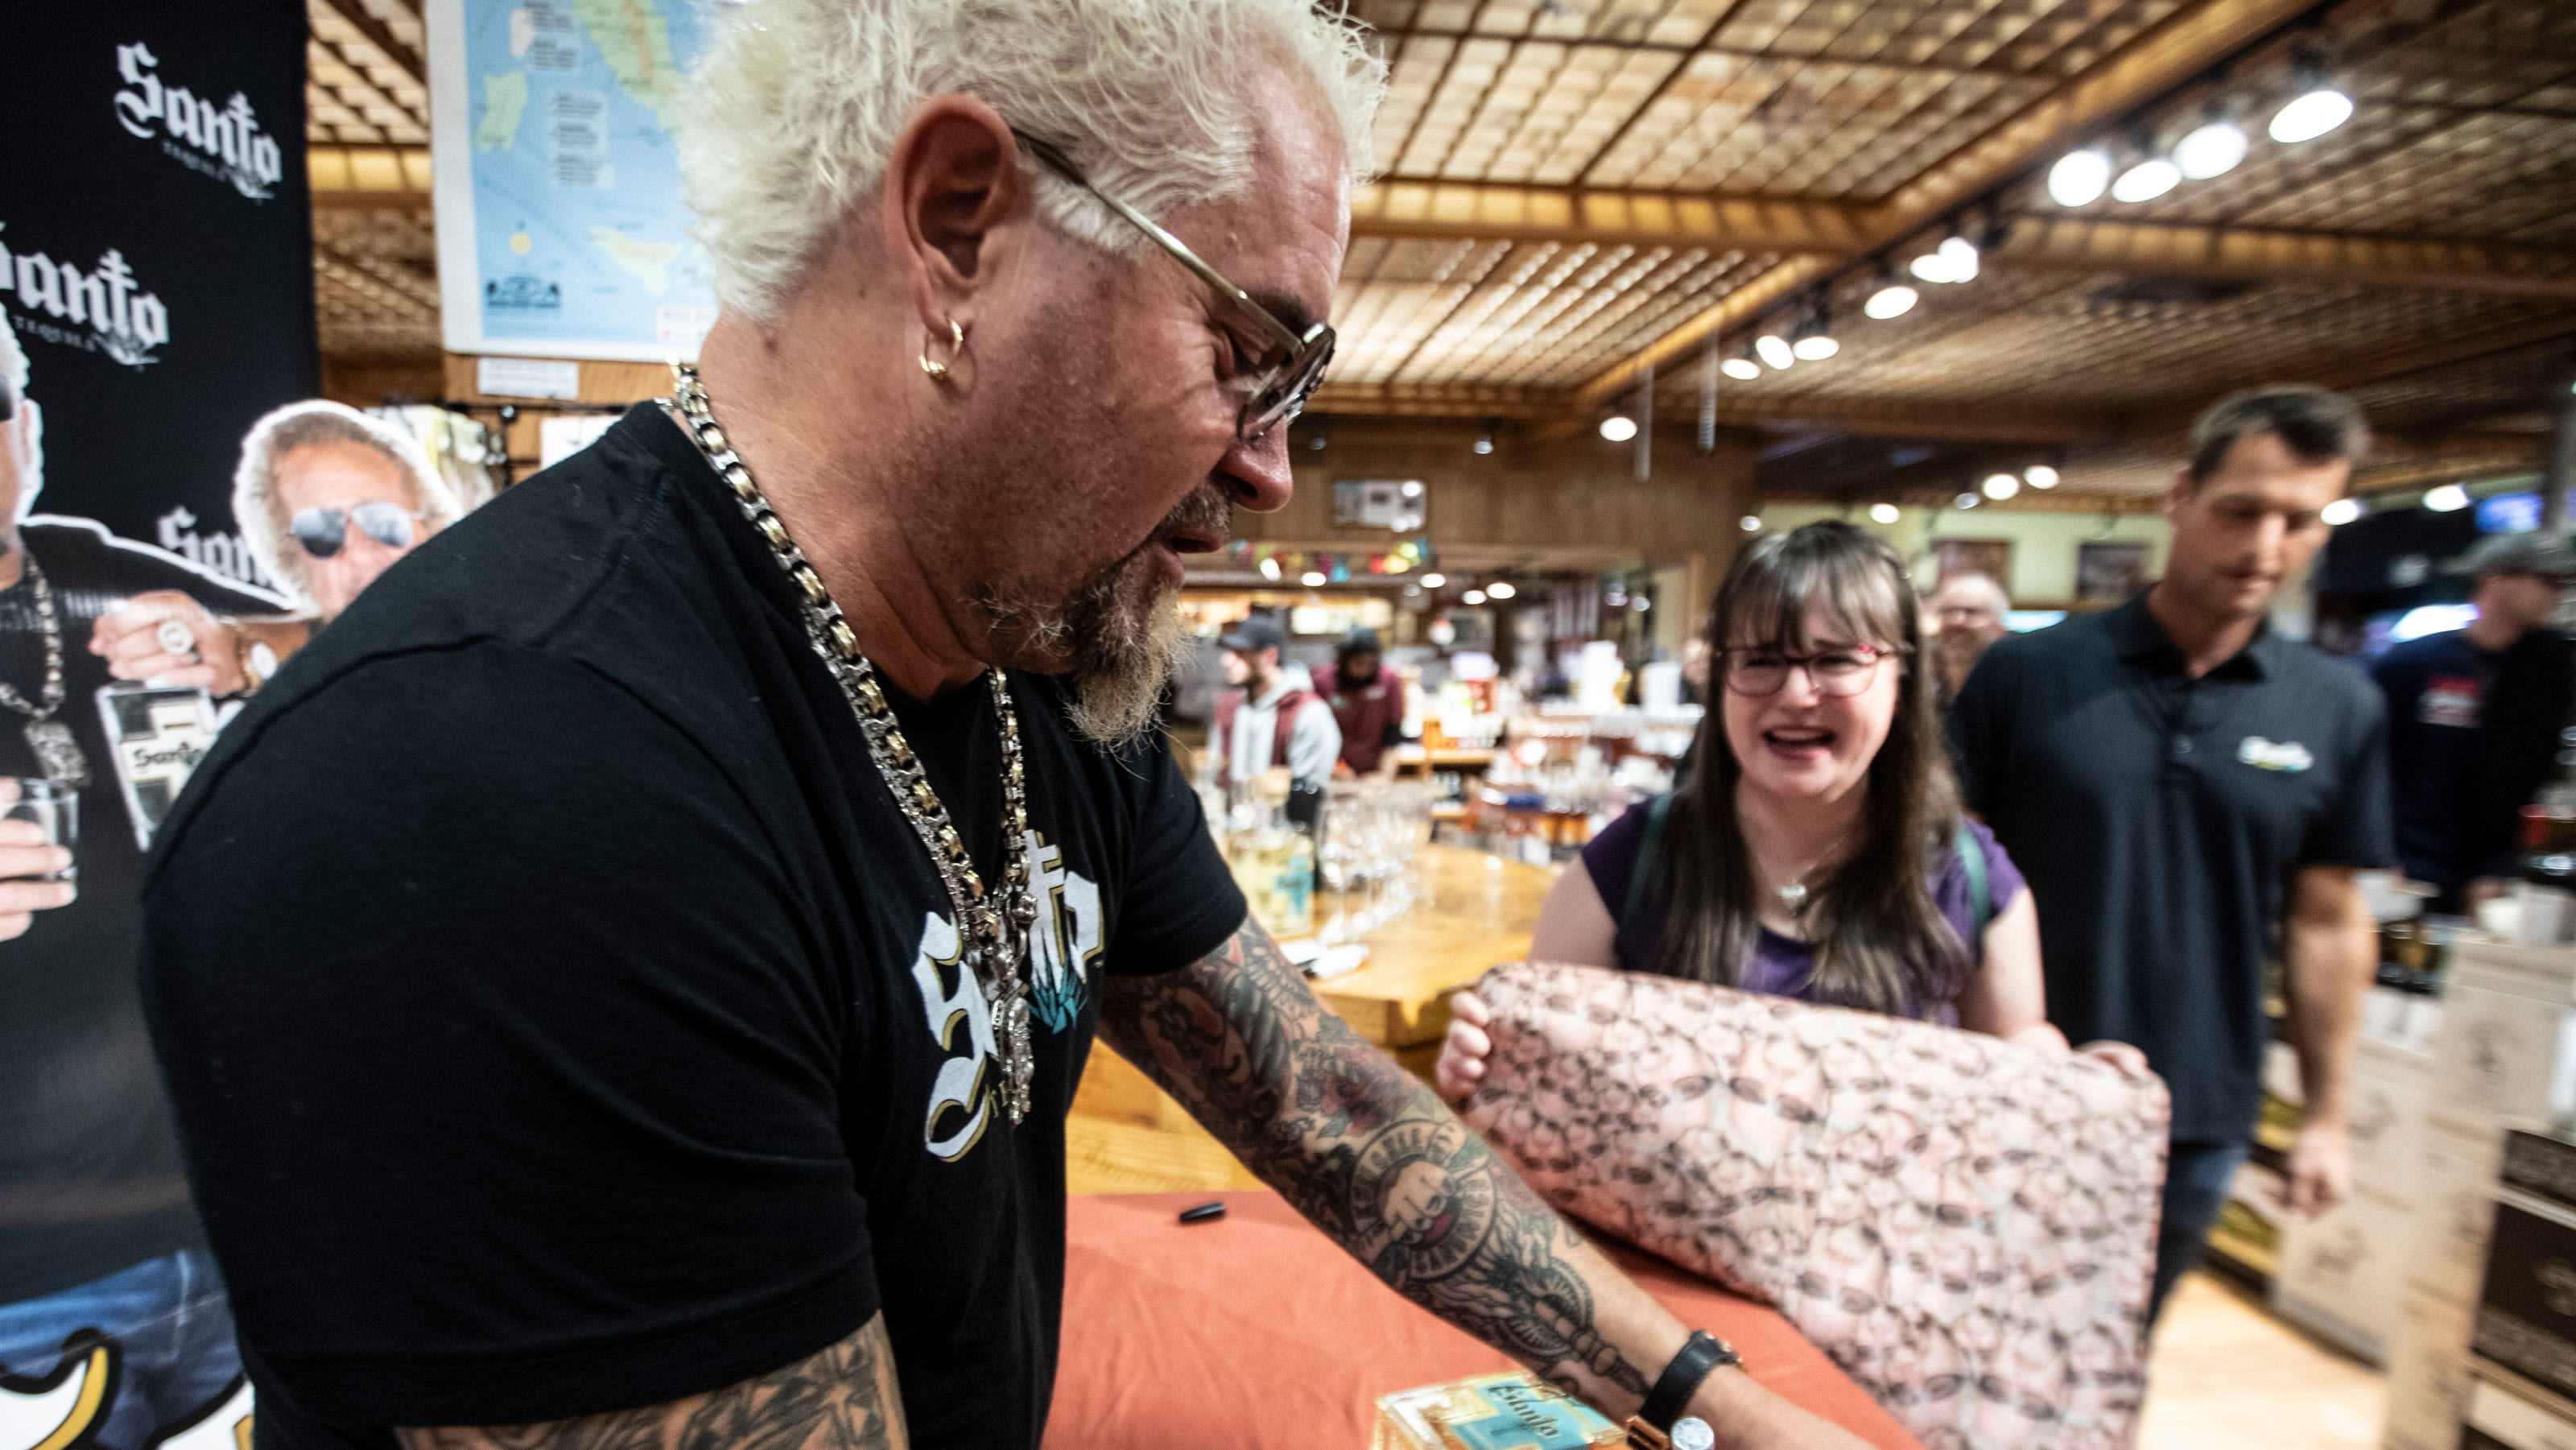 Guy Fieri thrills fans during appearance at Stew Leonards in Yonkers